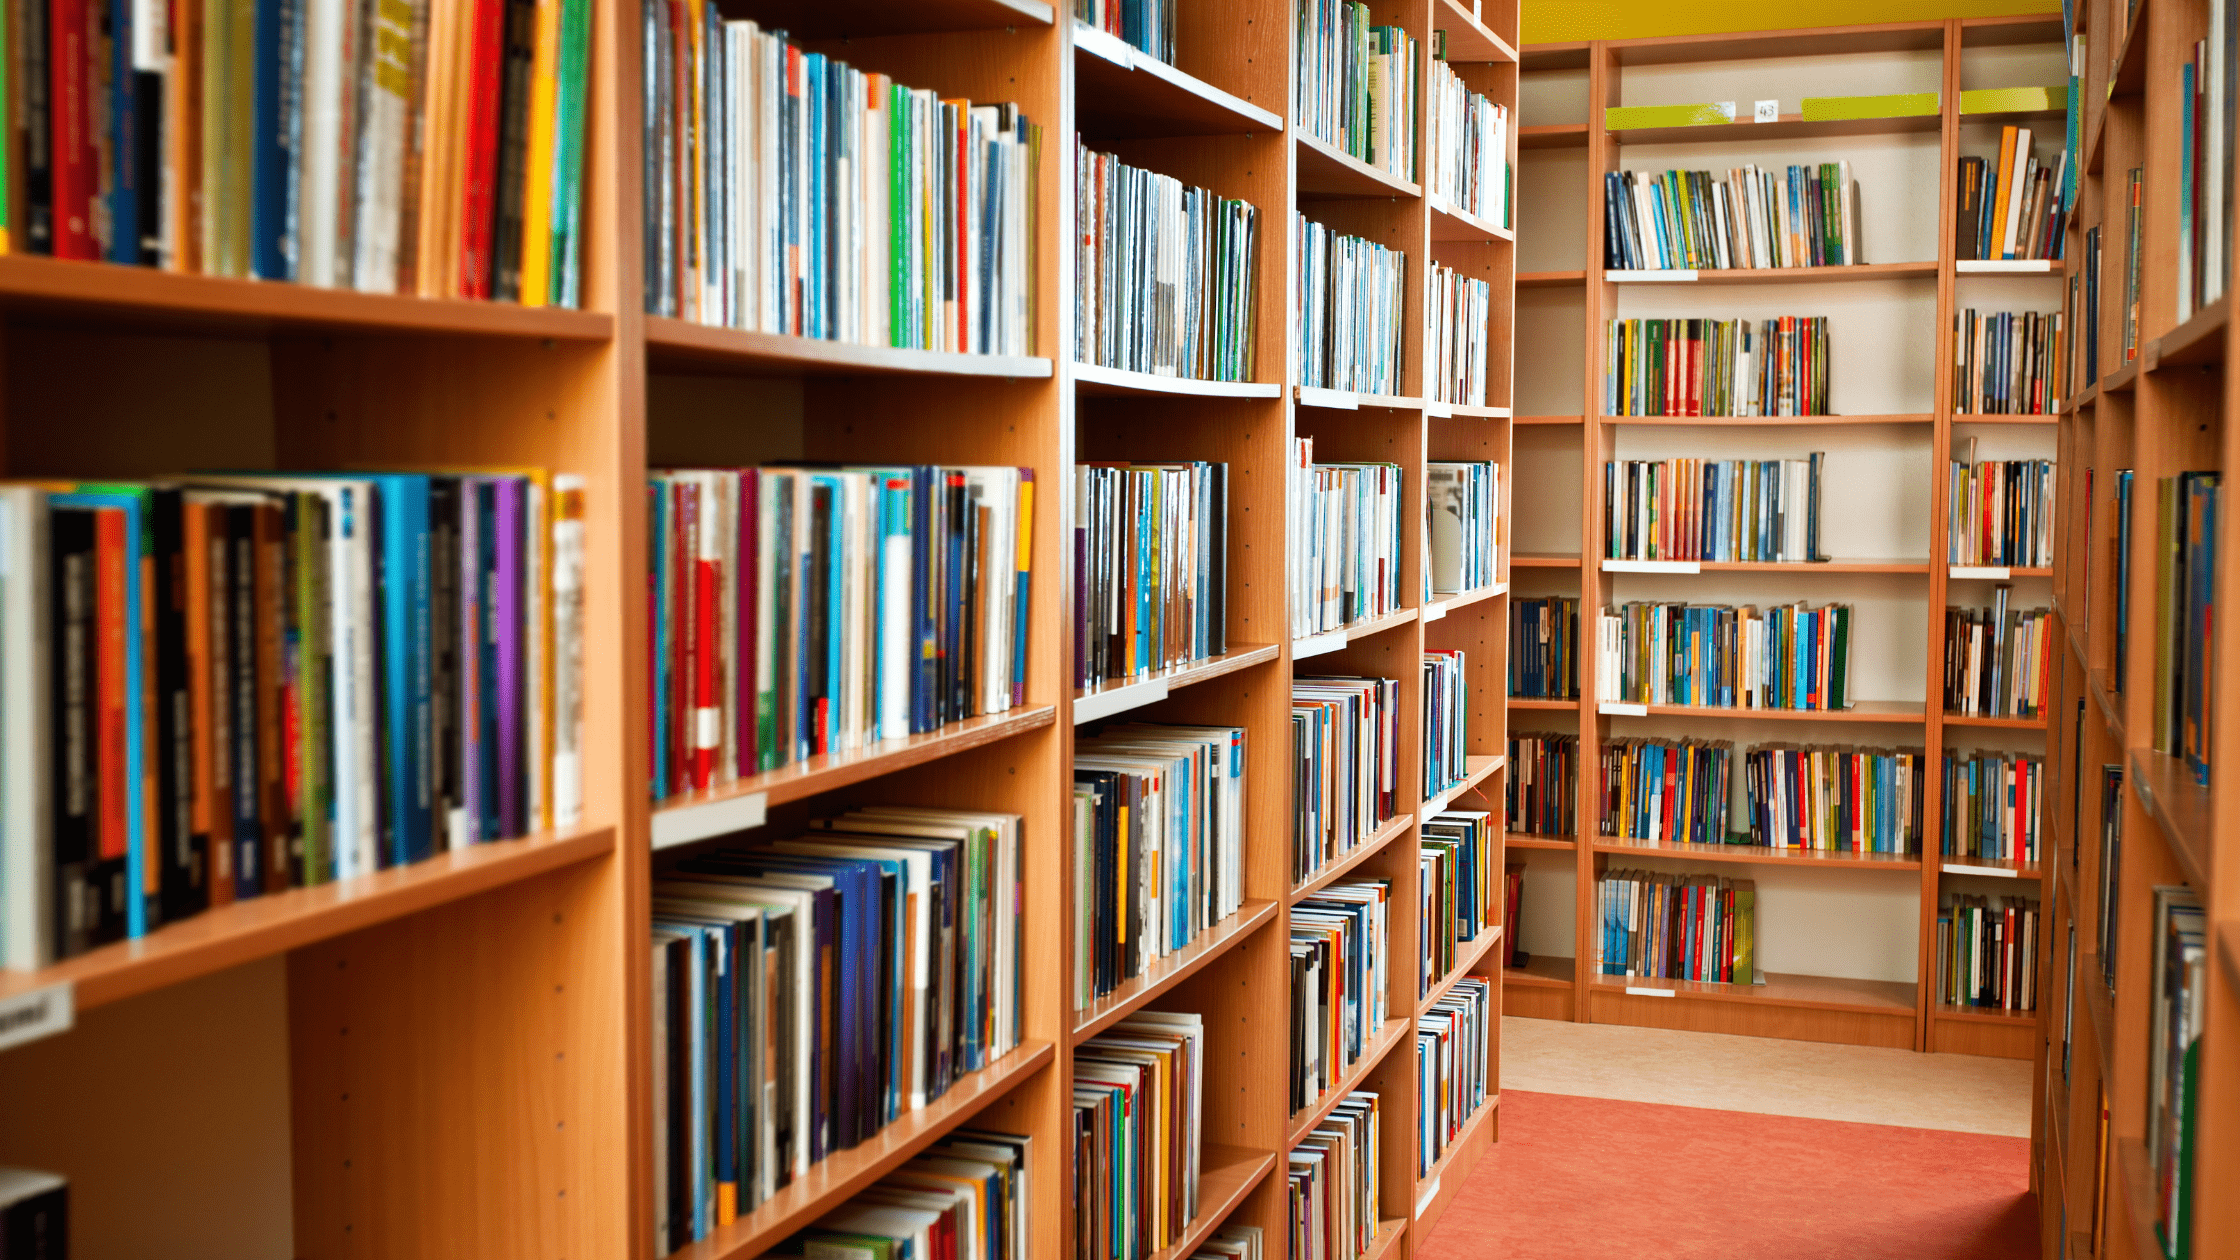 Importance of libraries - bookshelves